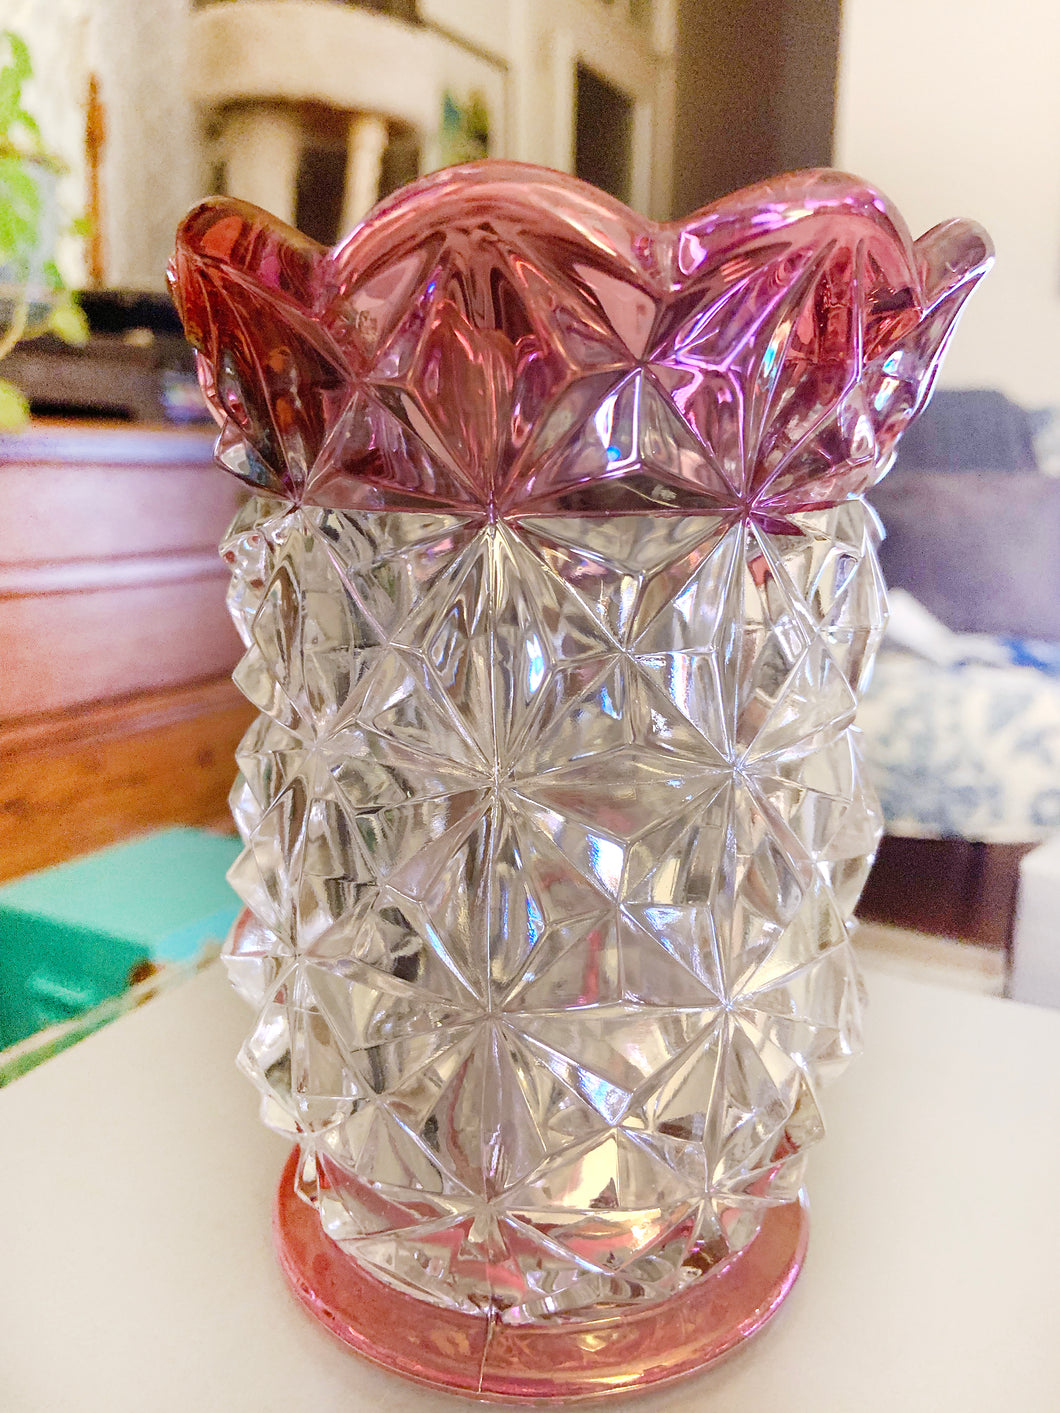 Vintage Ruby Flash Trim Pressed Glass Vase Star Pattern Scalloped Edge, USA Mothers Day Birthday Anniversary Shabby Chic Sparkly Cut Crystal Flea Market Style Flower Floral Bouquet Arrangement Sean Patty George Unique Housewarming Gift Special Occasion Toronto Canada Hamilton Freelton Antique Mall Community Store Shop Seller Reseller Vendor Pink